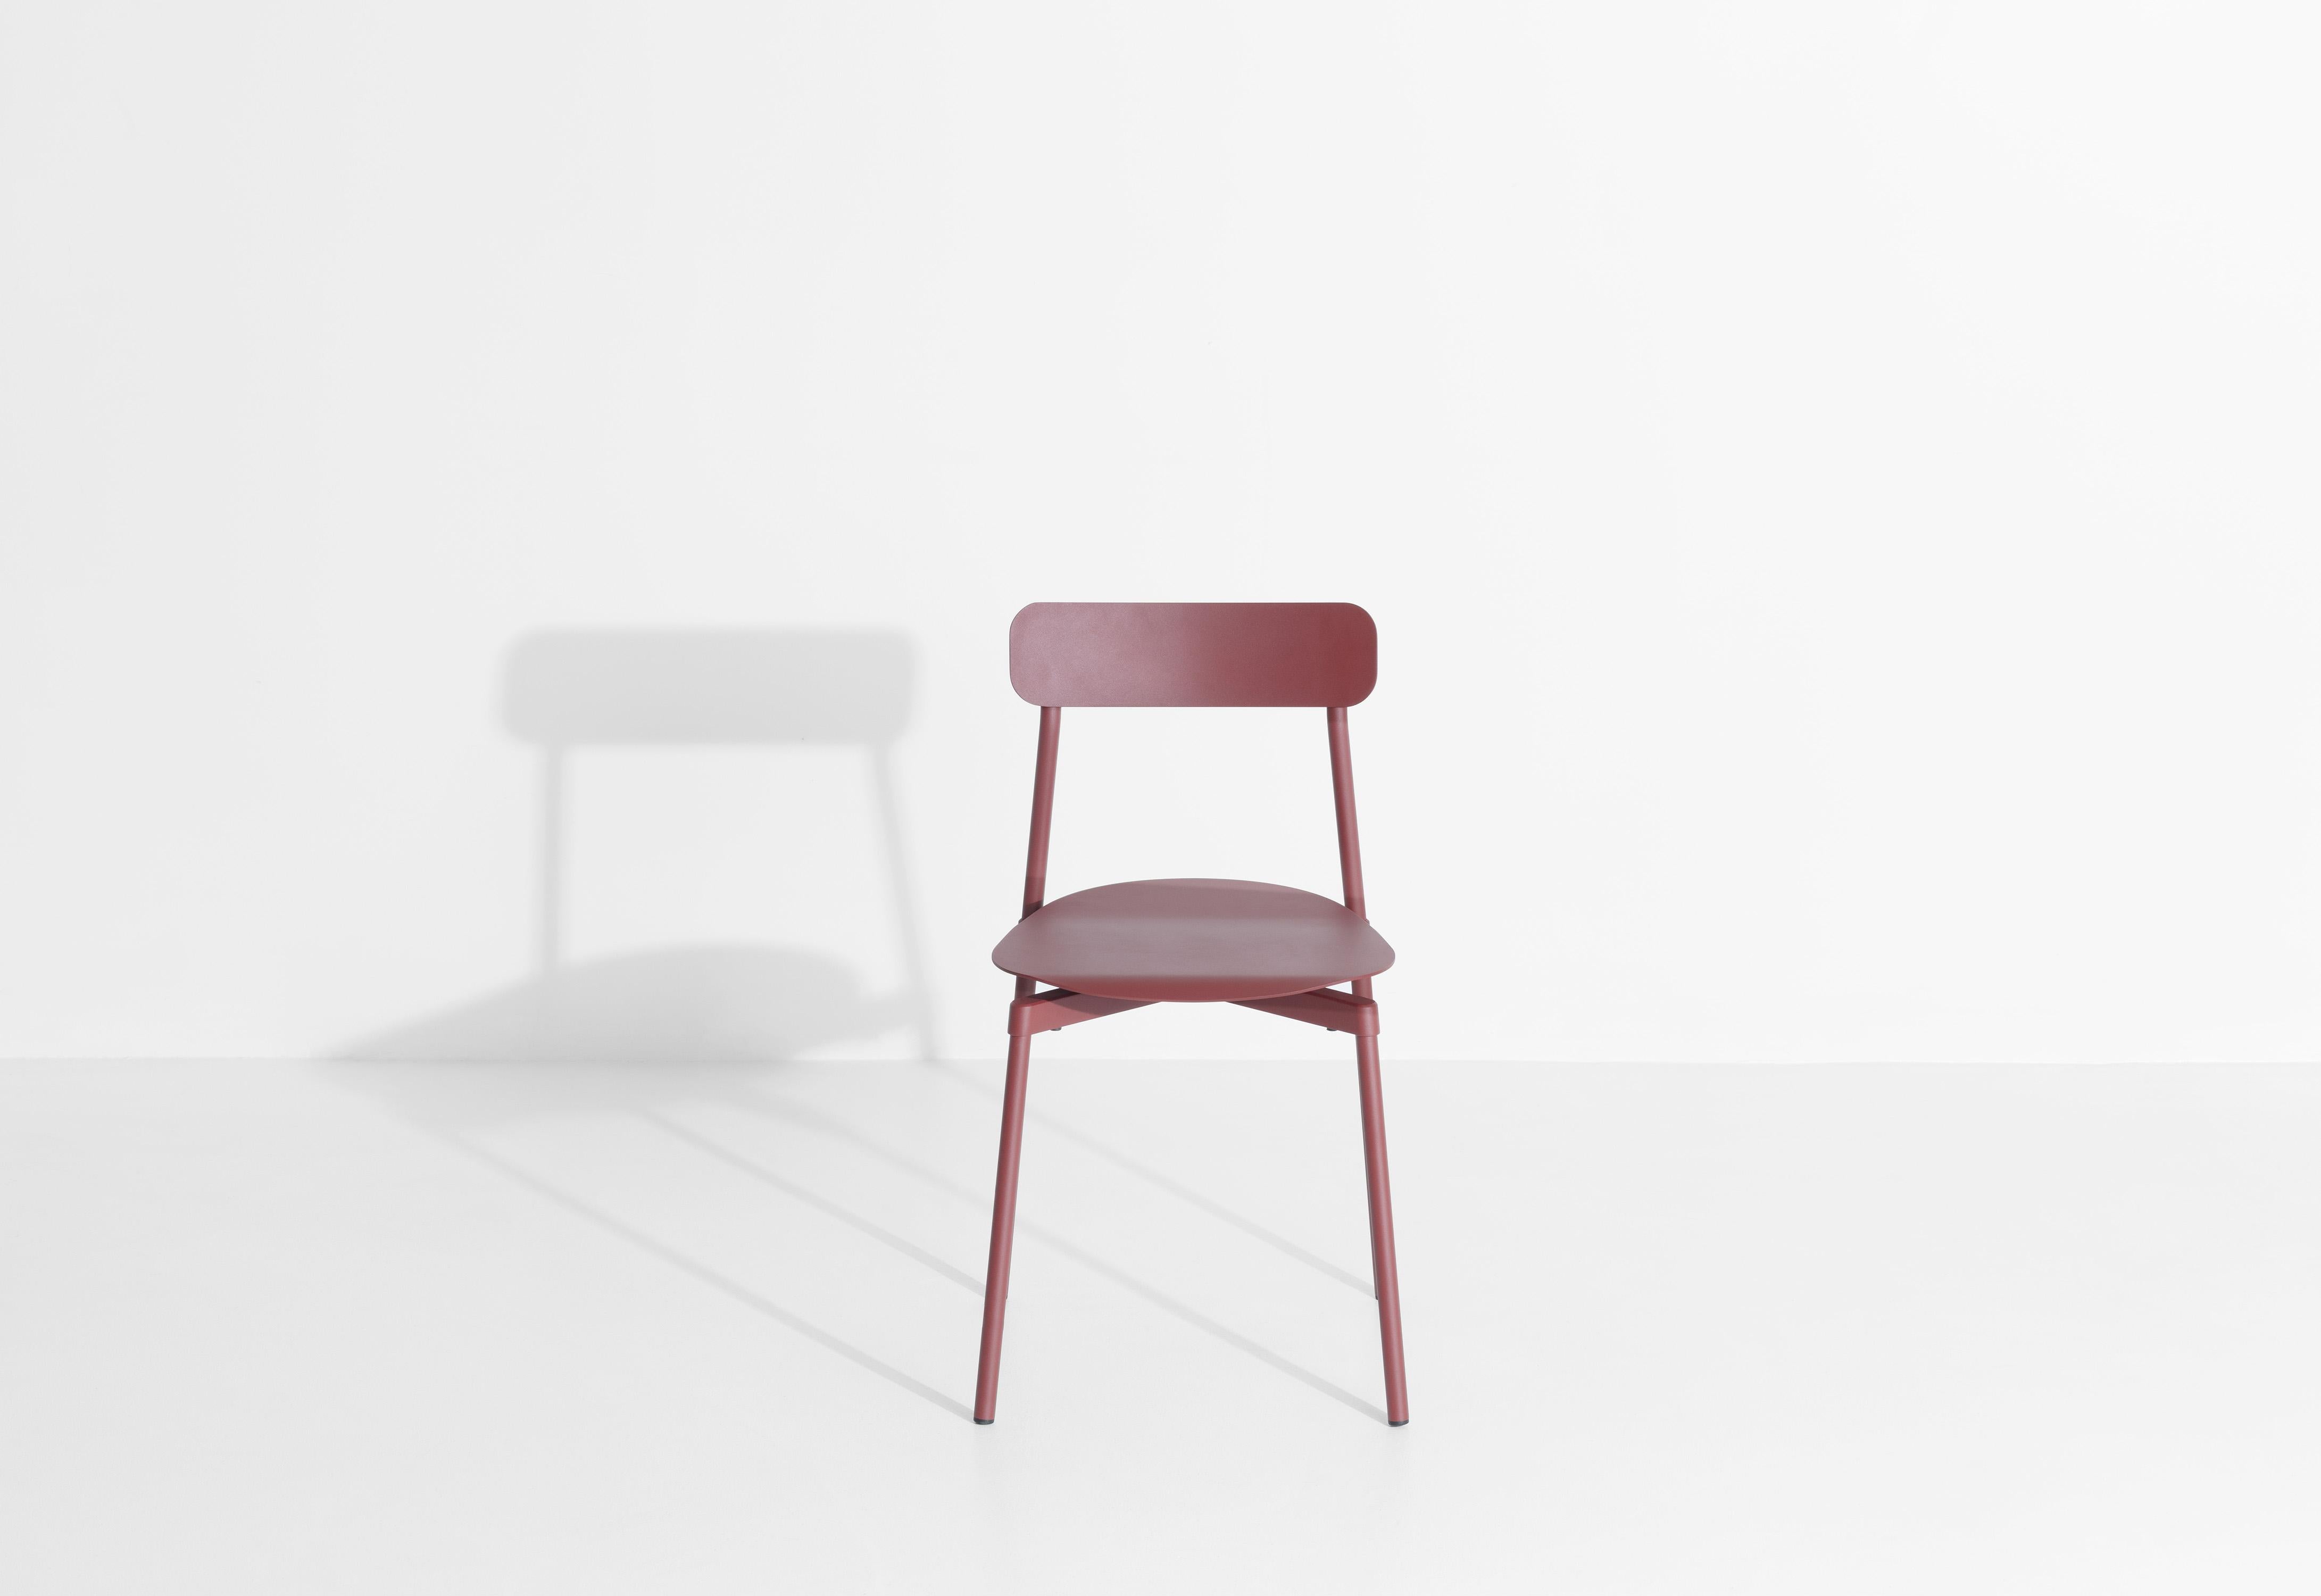 Chinese Petite Friture Fromme Chair in Brown-Red Aluminium by Tom Chung, 2019 For Sale